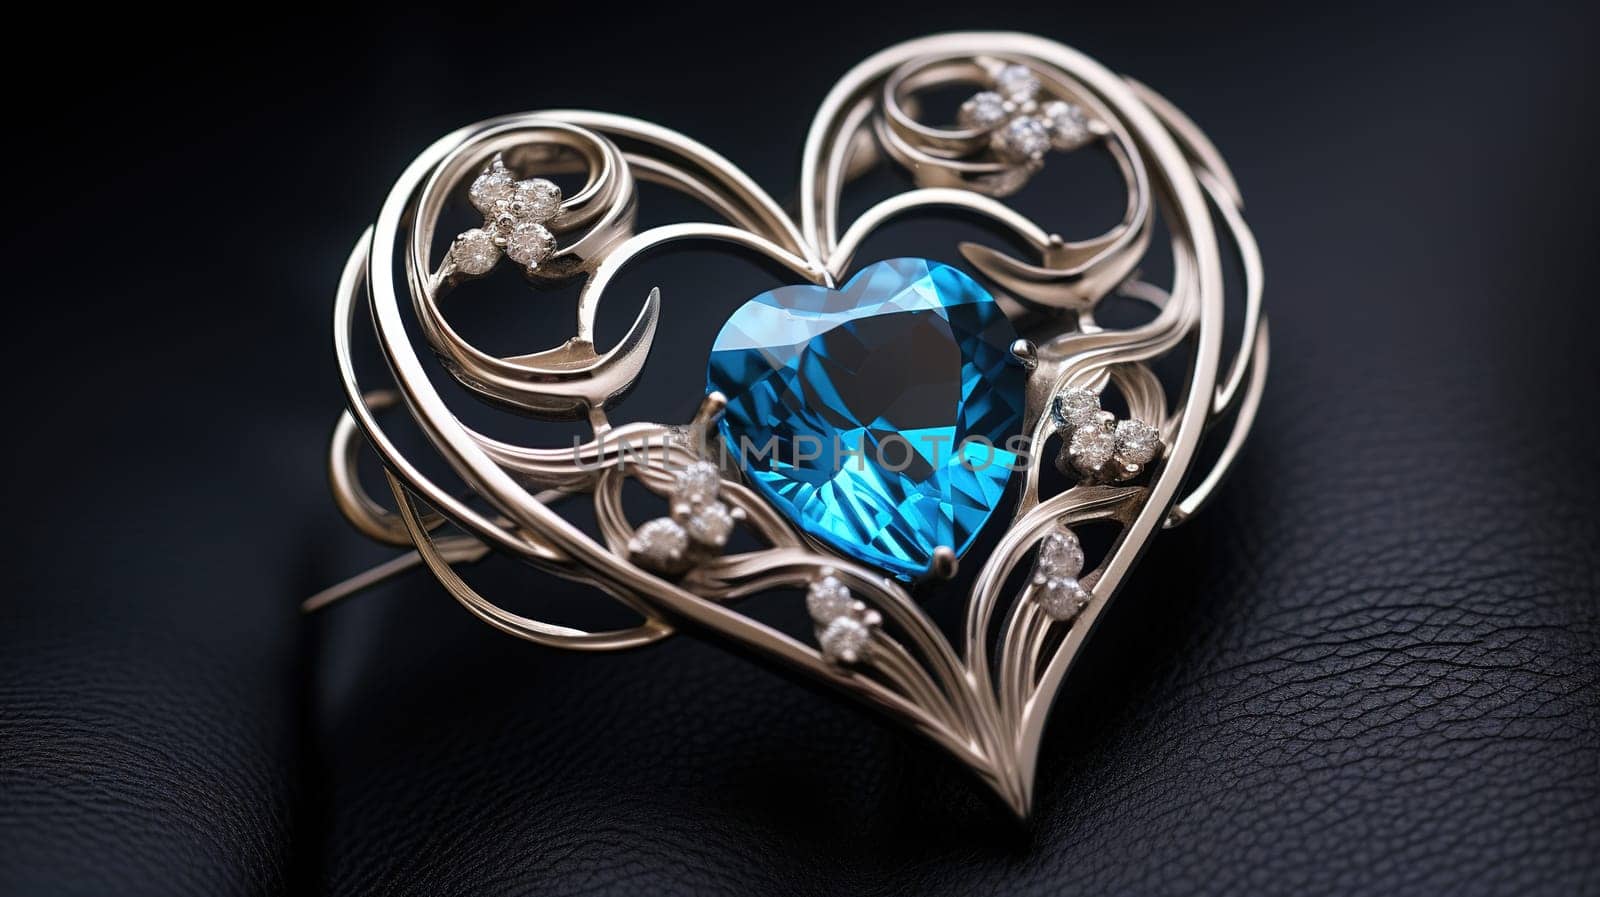 Silver brooch in shape of heart with blue topaz crystal in the middle,gift for your beloved woman on Valentines Day by KaterinaDalemans